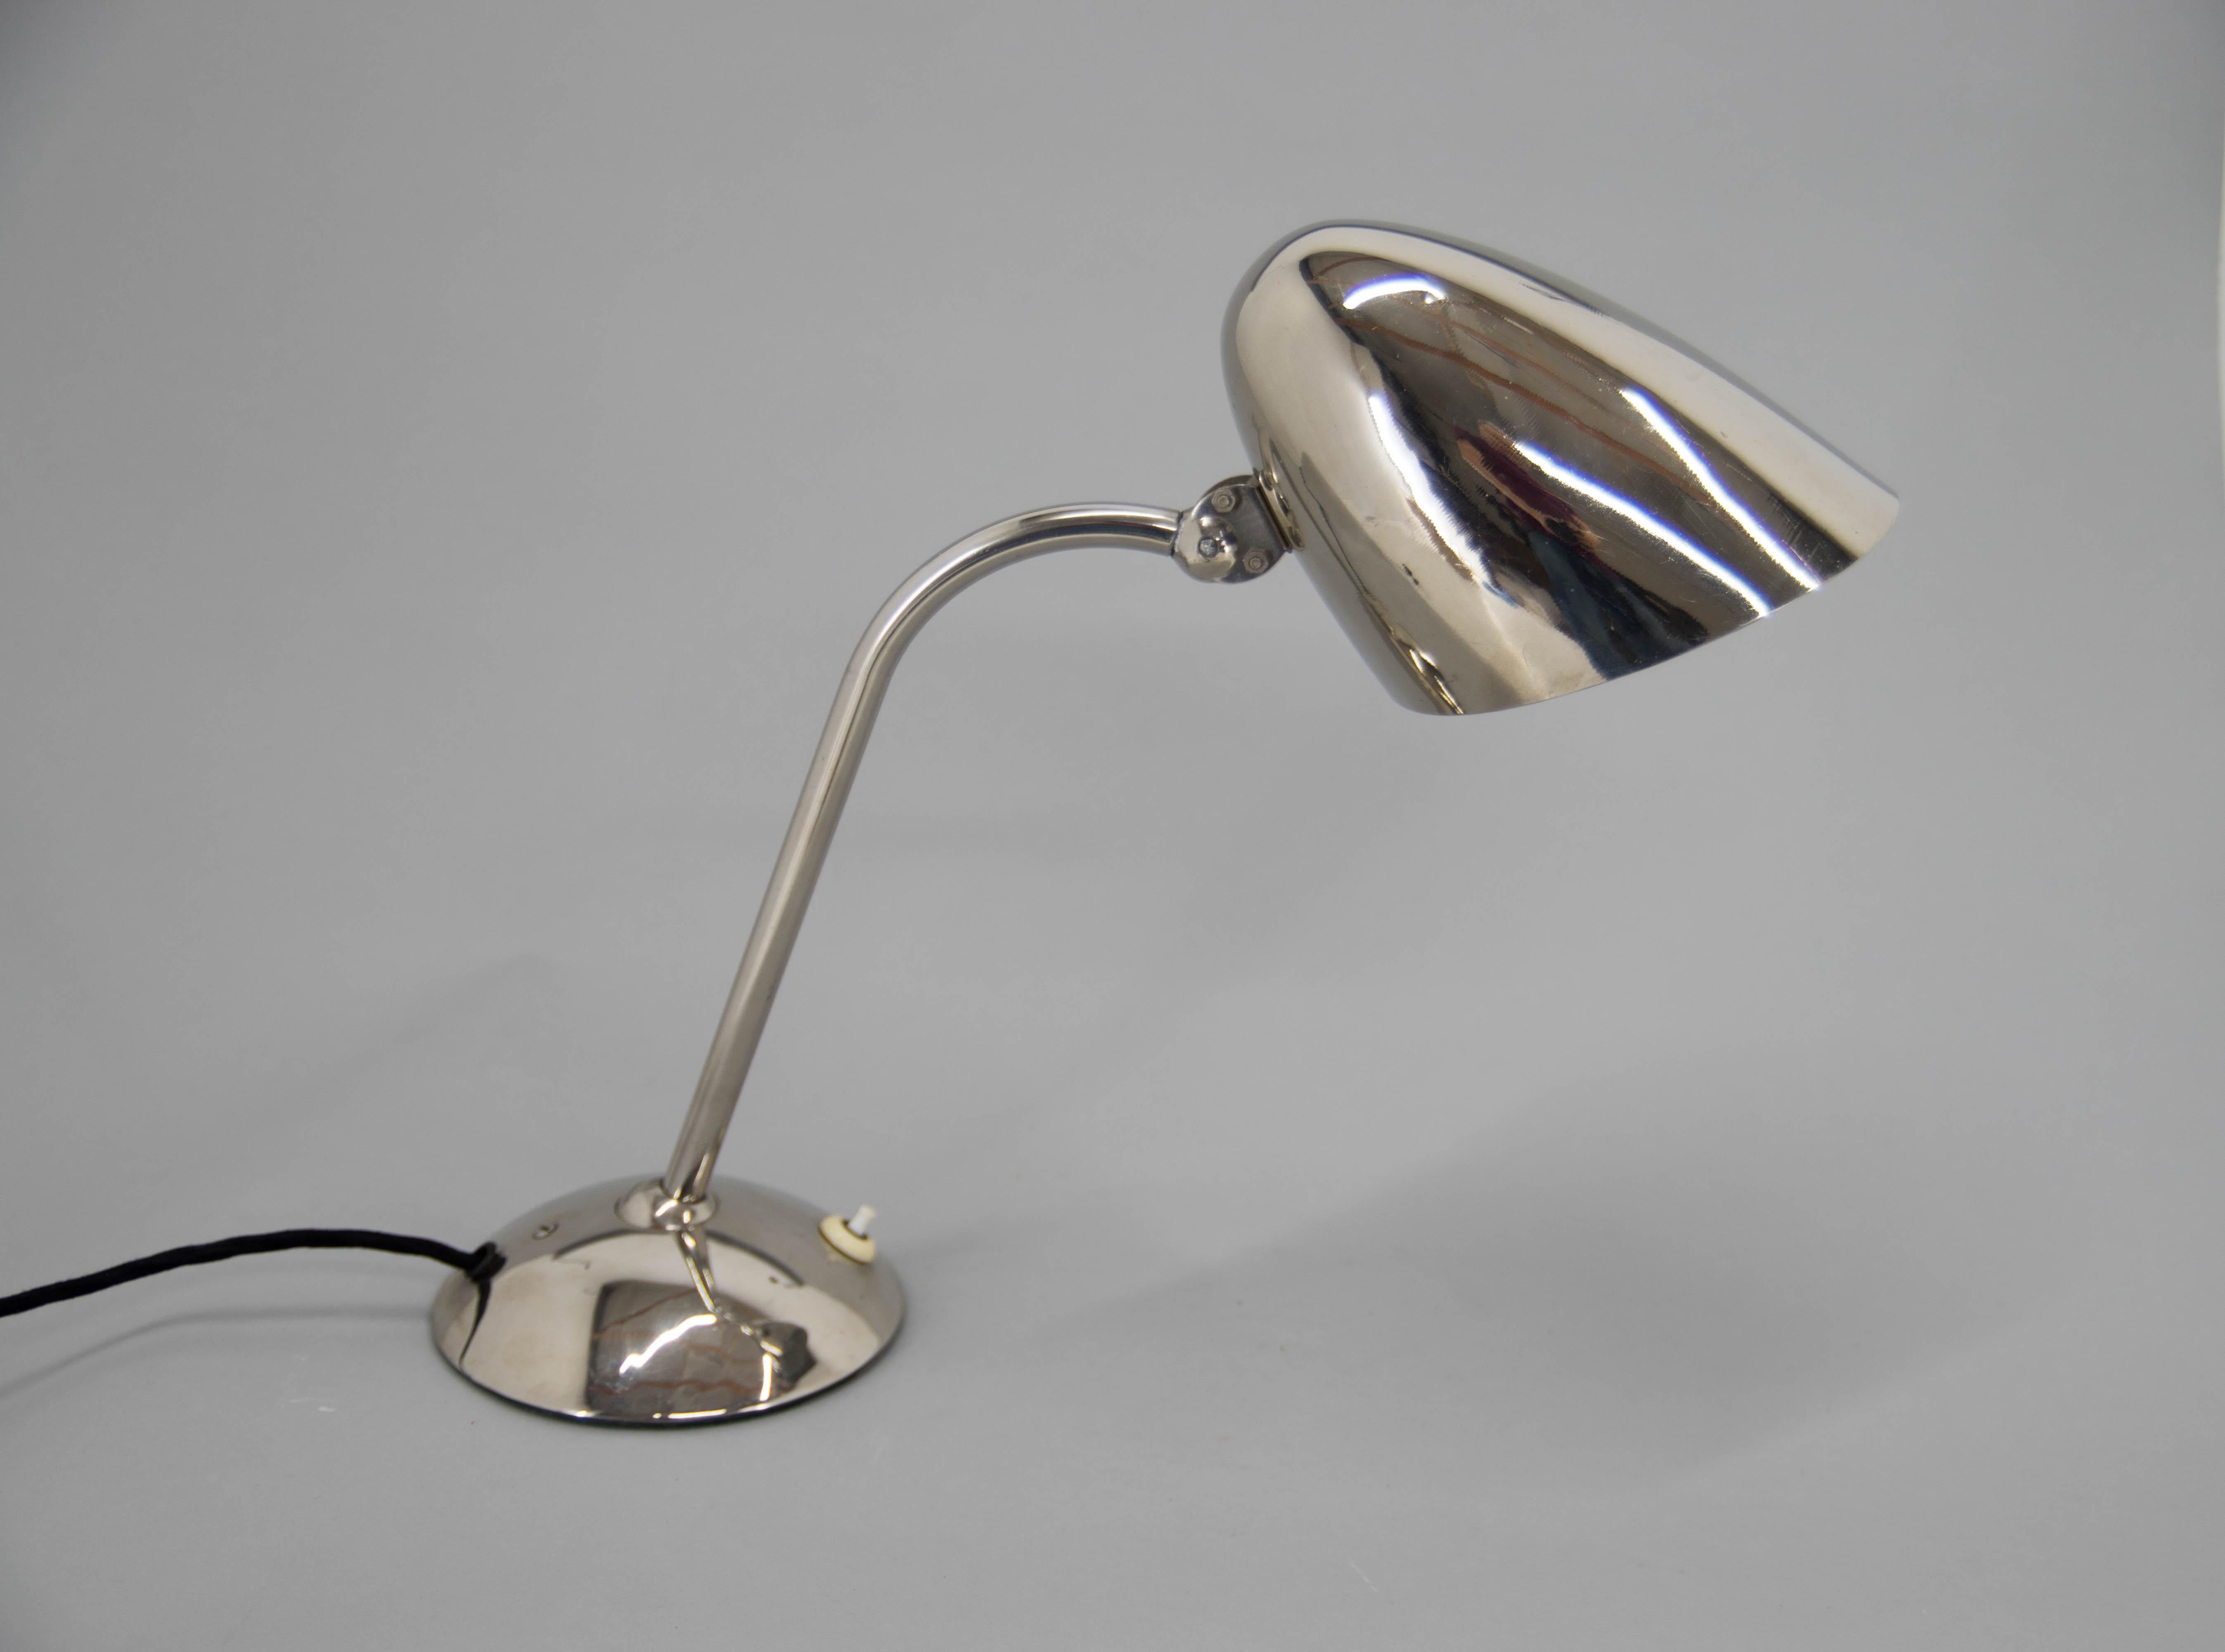 Functionalist / Bauhaus Flexible Table Lamp by Franta Anyz, 1930s For Sale 1